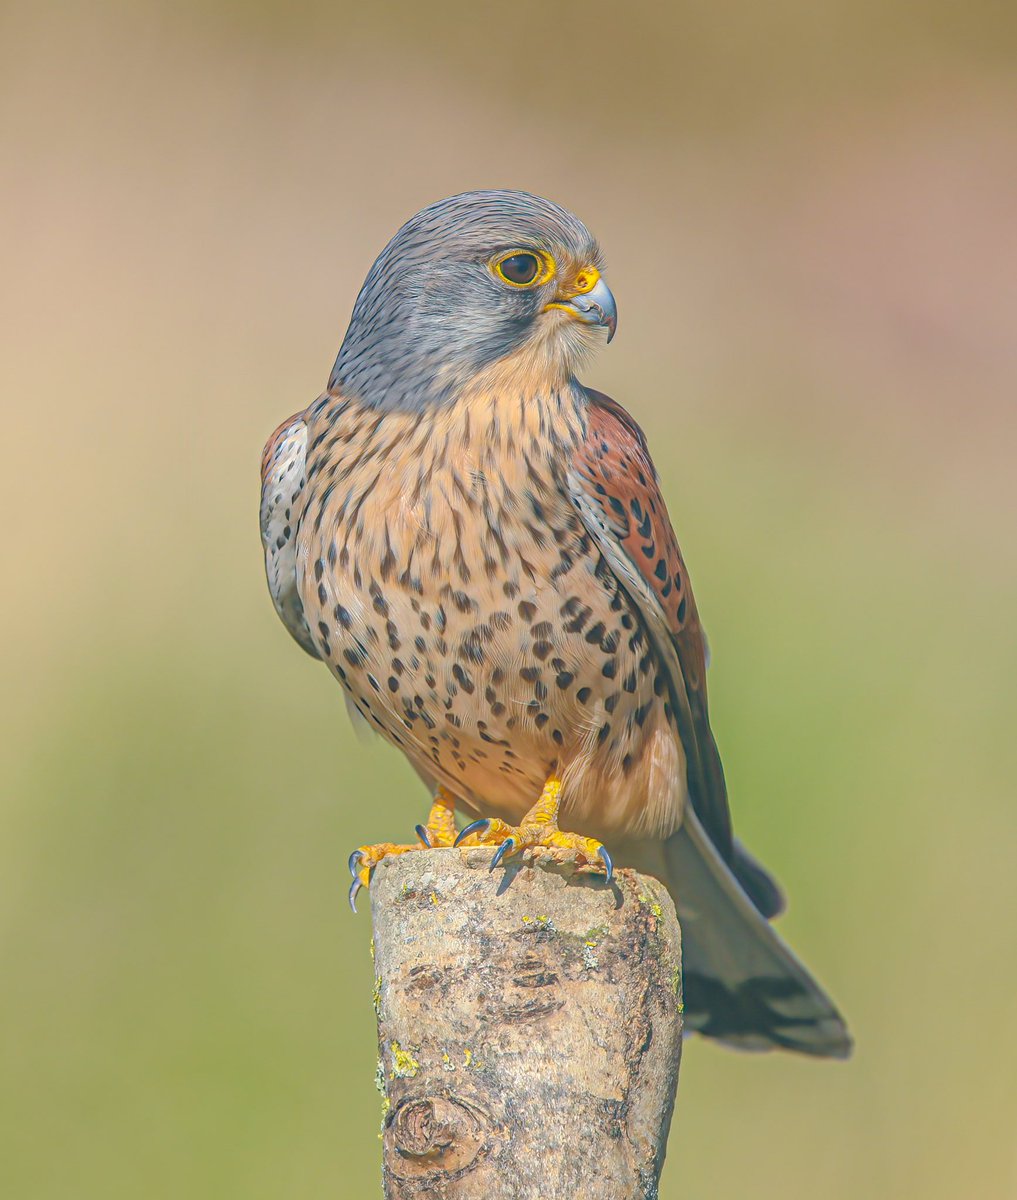 Tonight’s thread, poses I’ll start with this Male Kestrel UK 🇬🇧